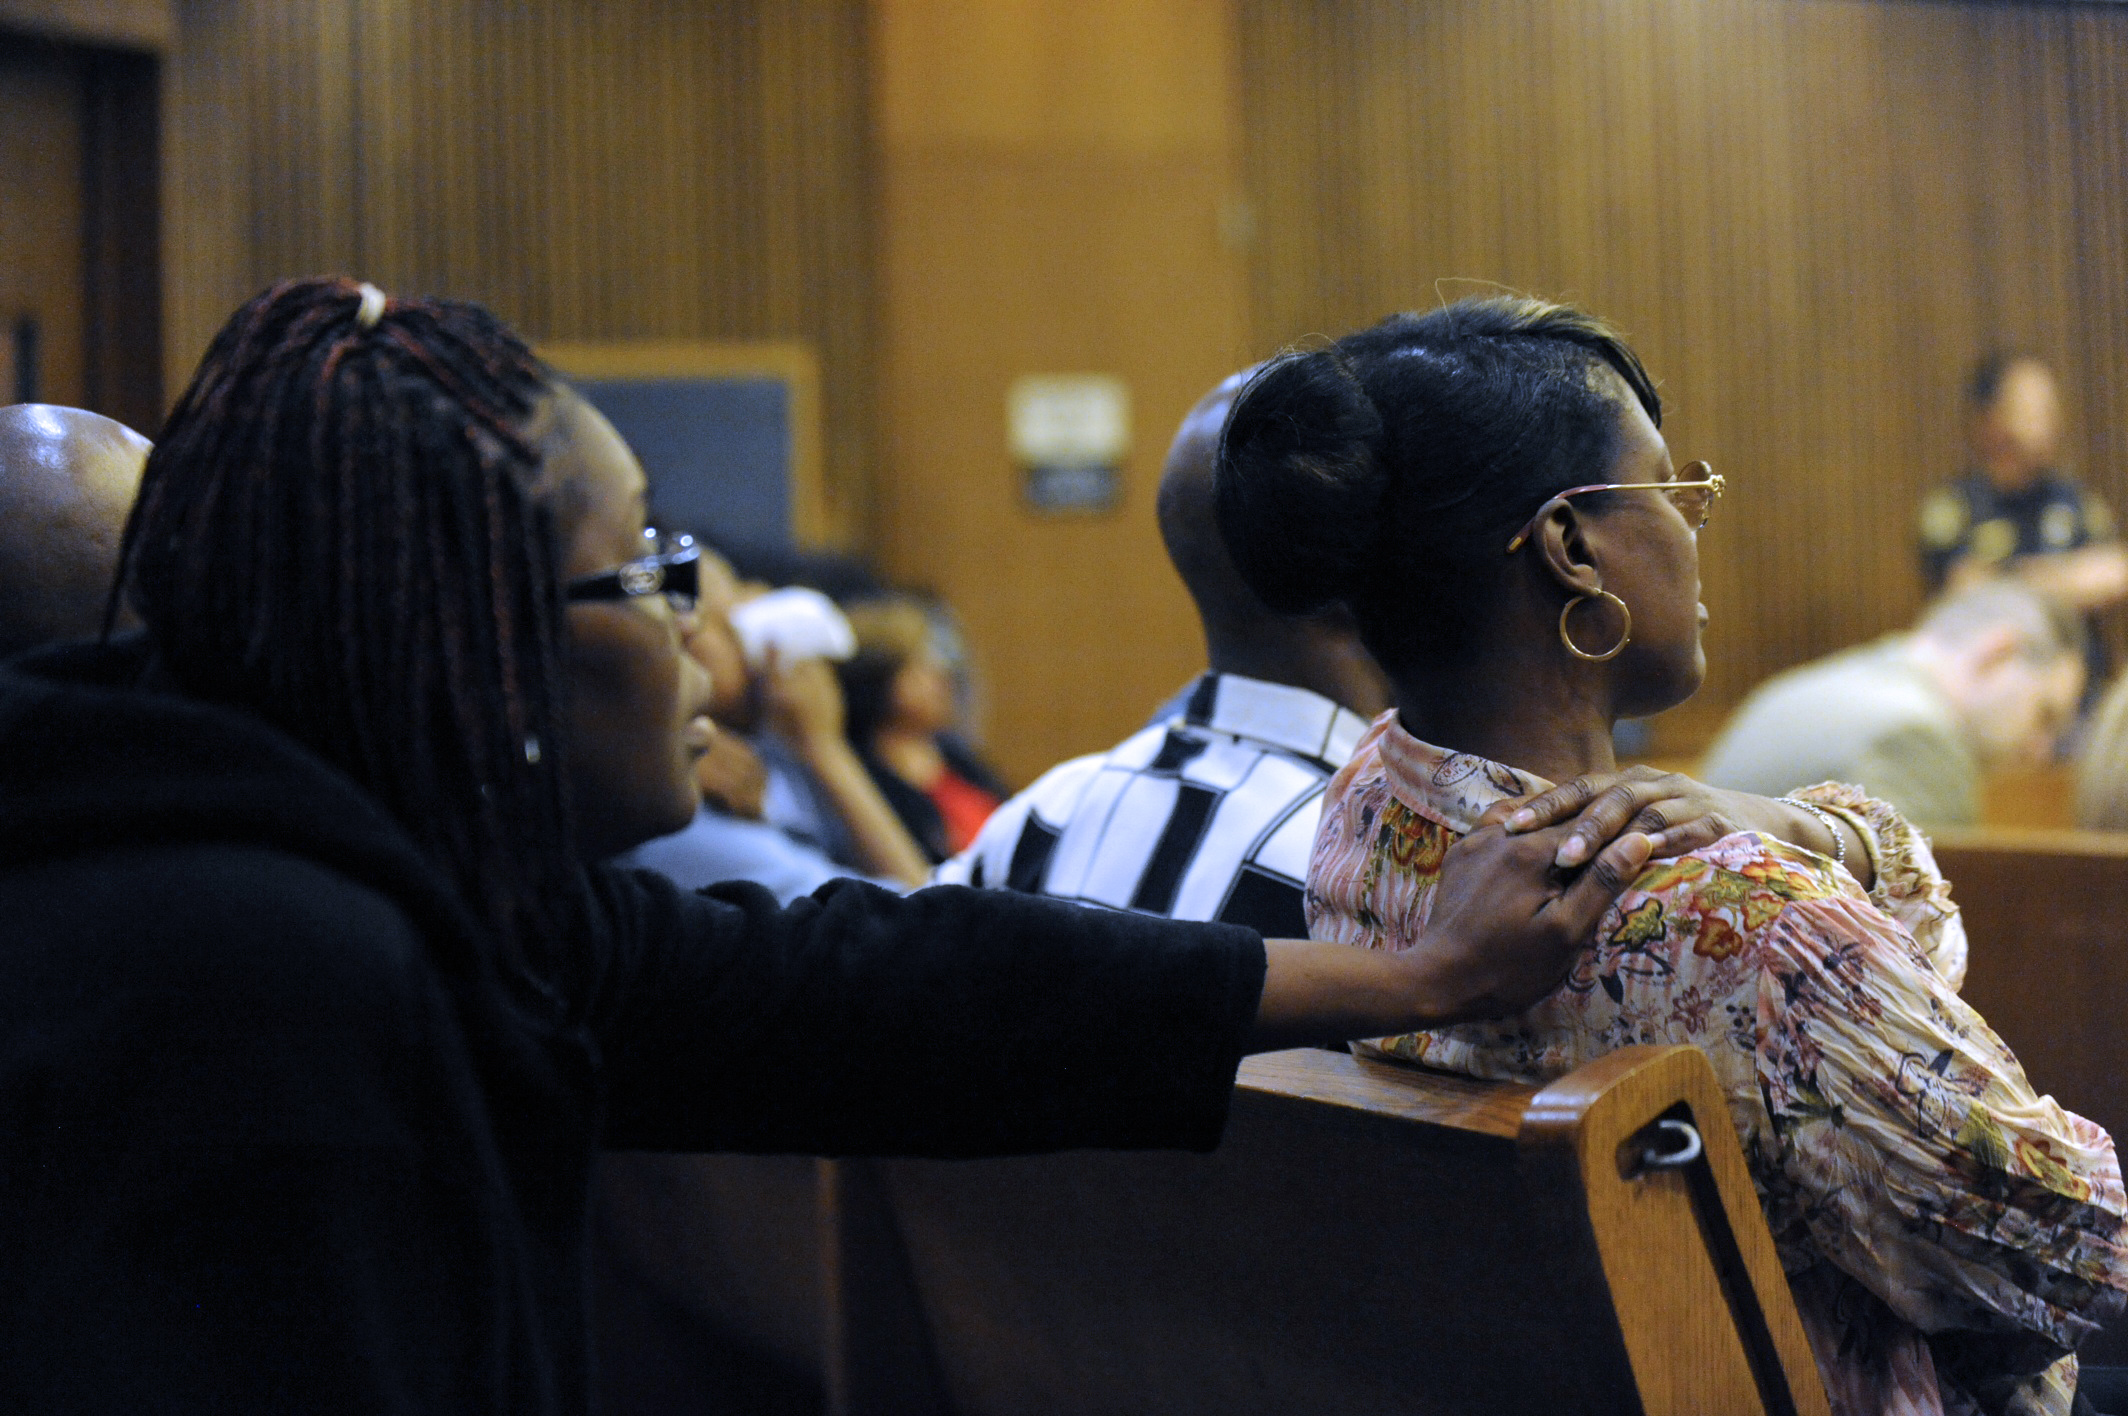 PHOTO: Monica McBride, right, reacts to photos of her deceased daughter during the Theodore Wafer trial in Detroit on July 24, 2014.